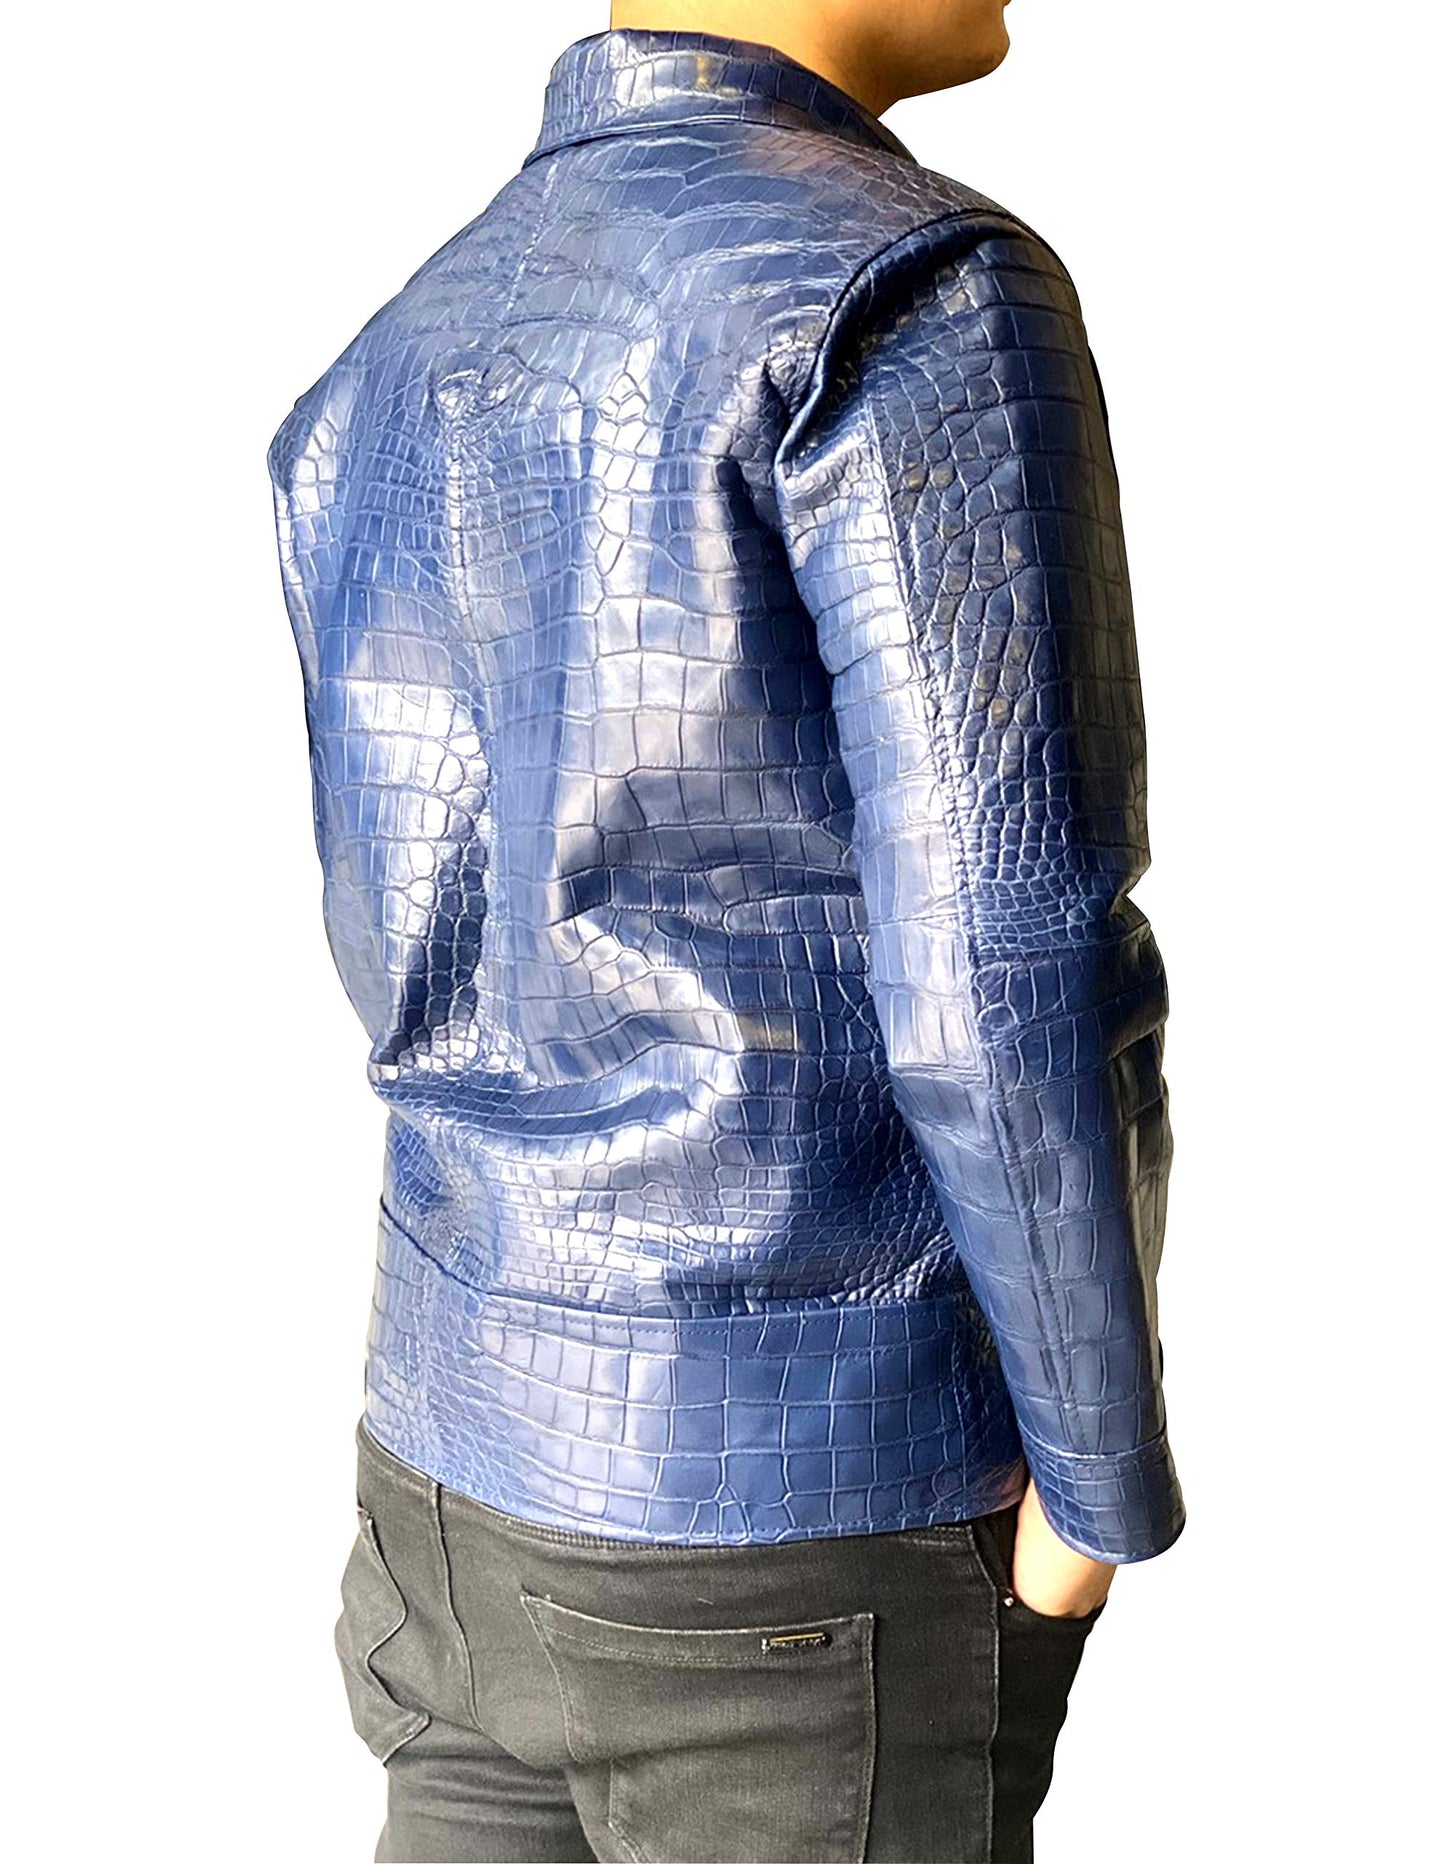 Woman with Colorful Sequin Jacket and Blue Crocodile Leather Bag